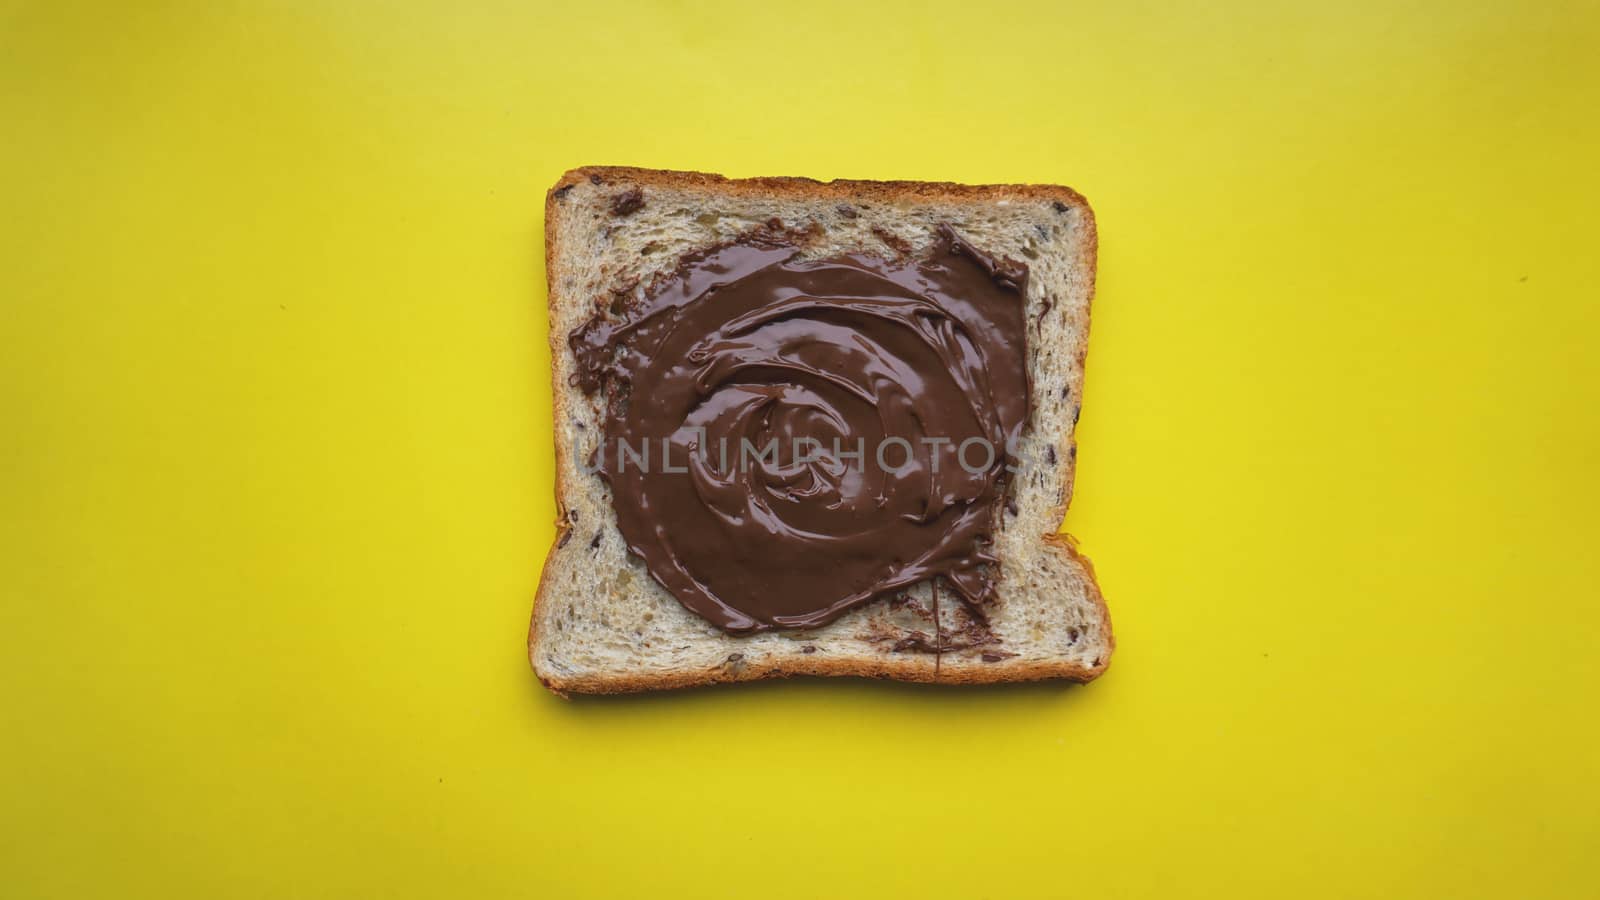 Toast on yellow background - sandwich with chocolate spread. Background for breakfast. View from above - Copy space photography.